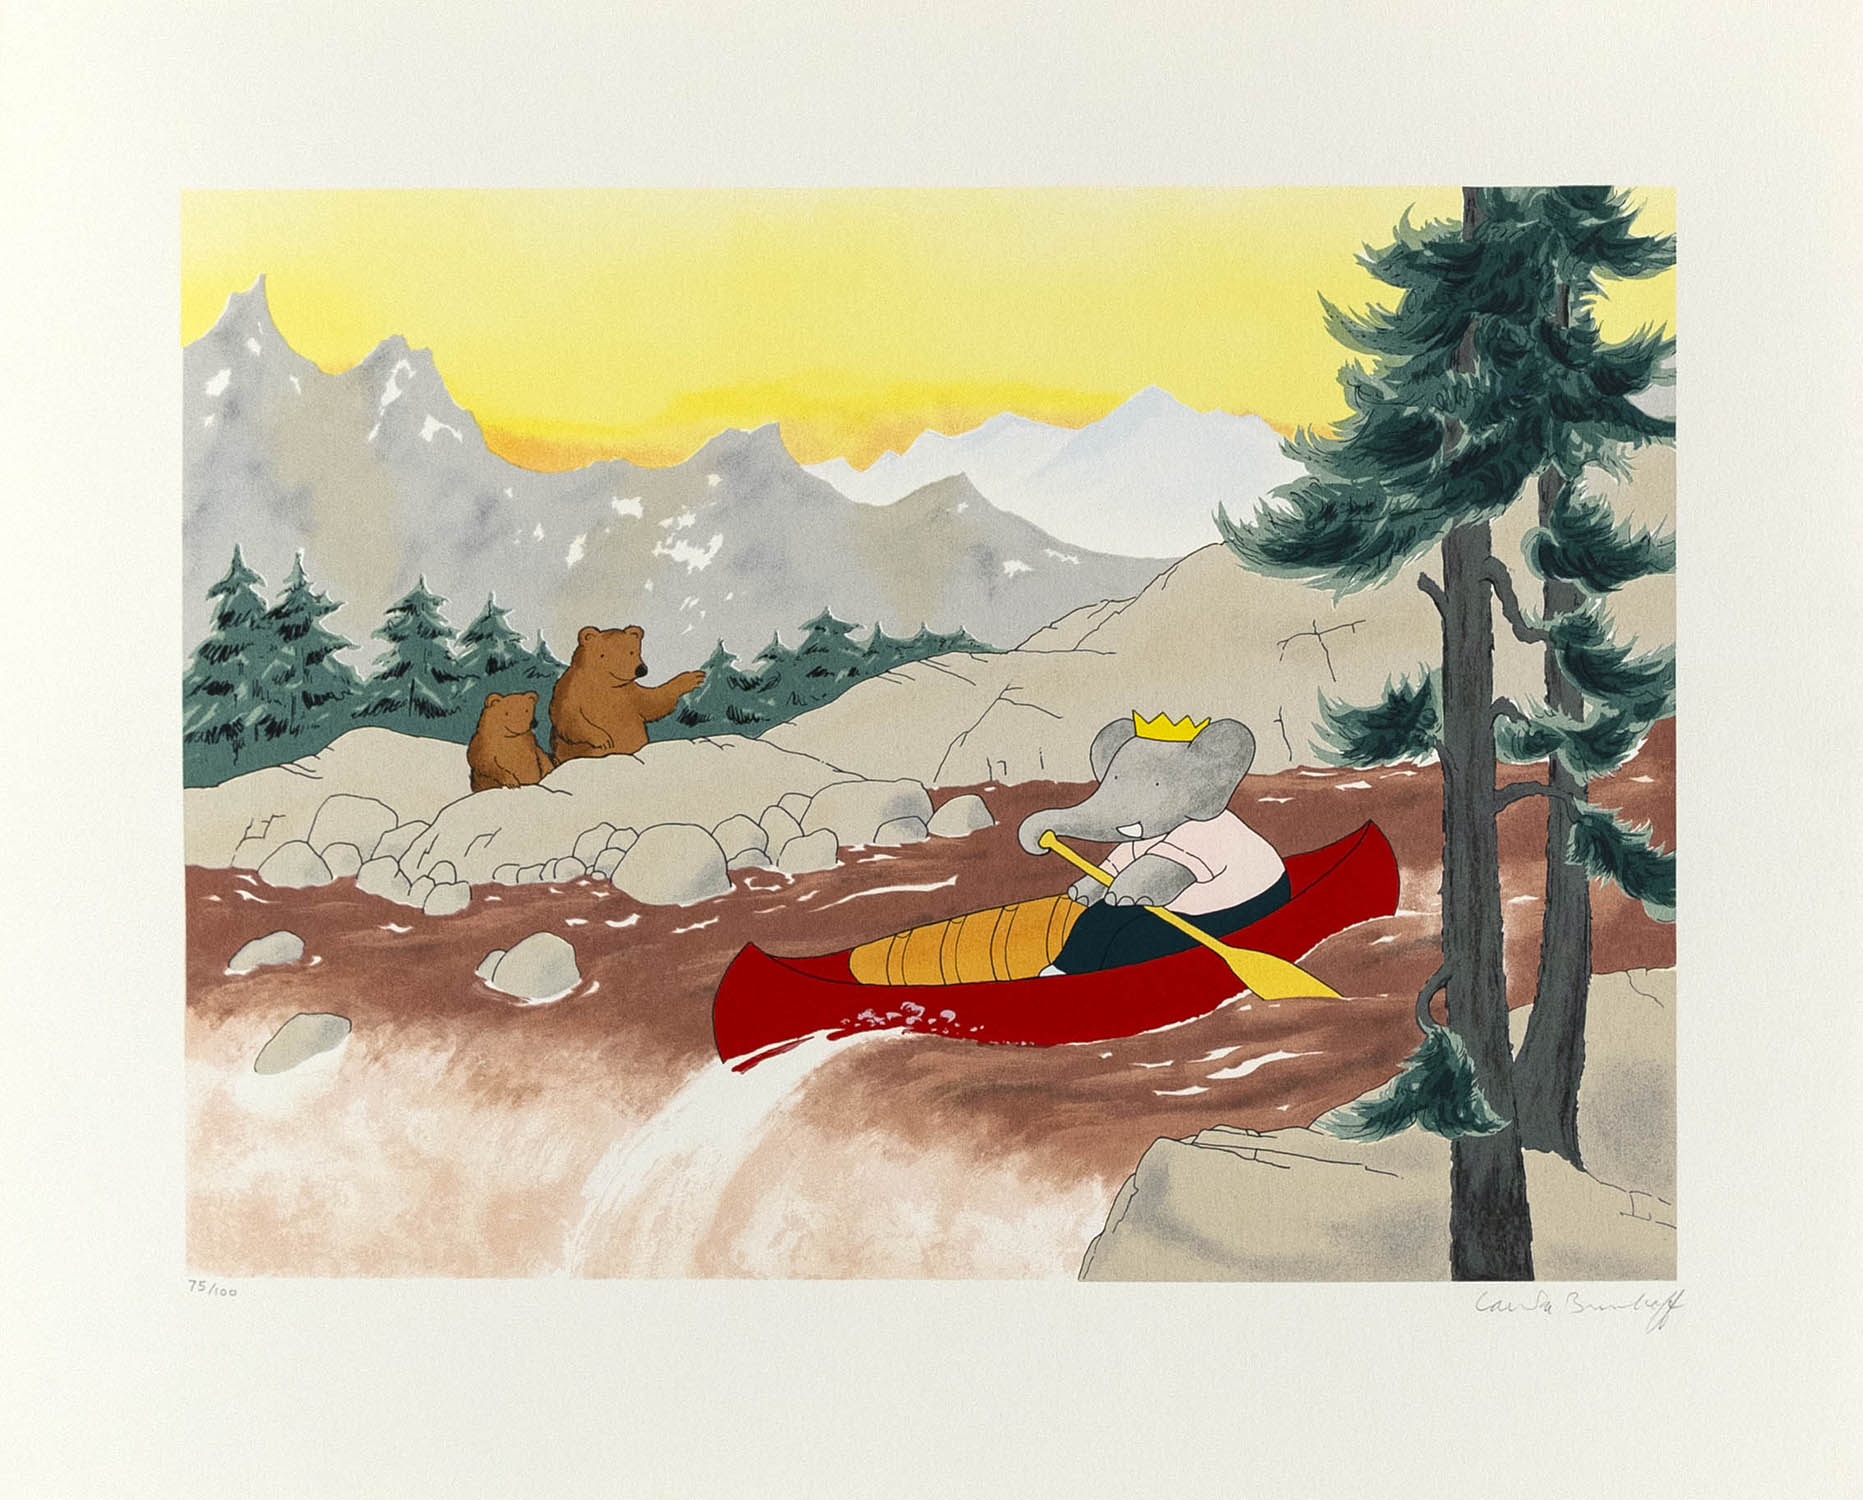 In the Wilderness, 1994, 36 color silkscreen 23 3/4 x 29 1/2 inches (60.3 x 74.9 cm) Edition of 10